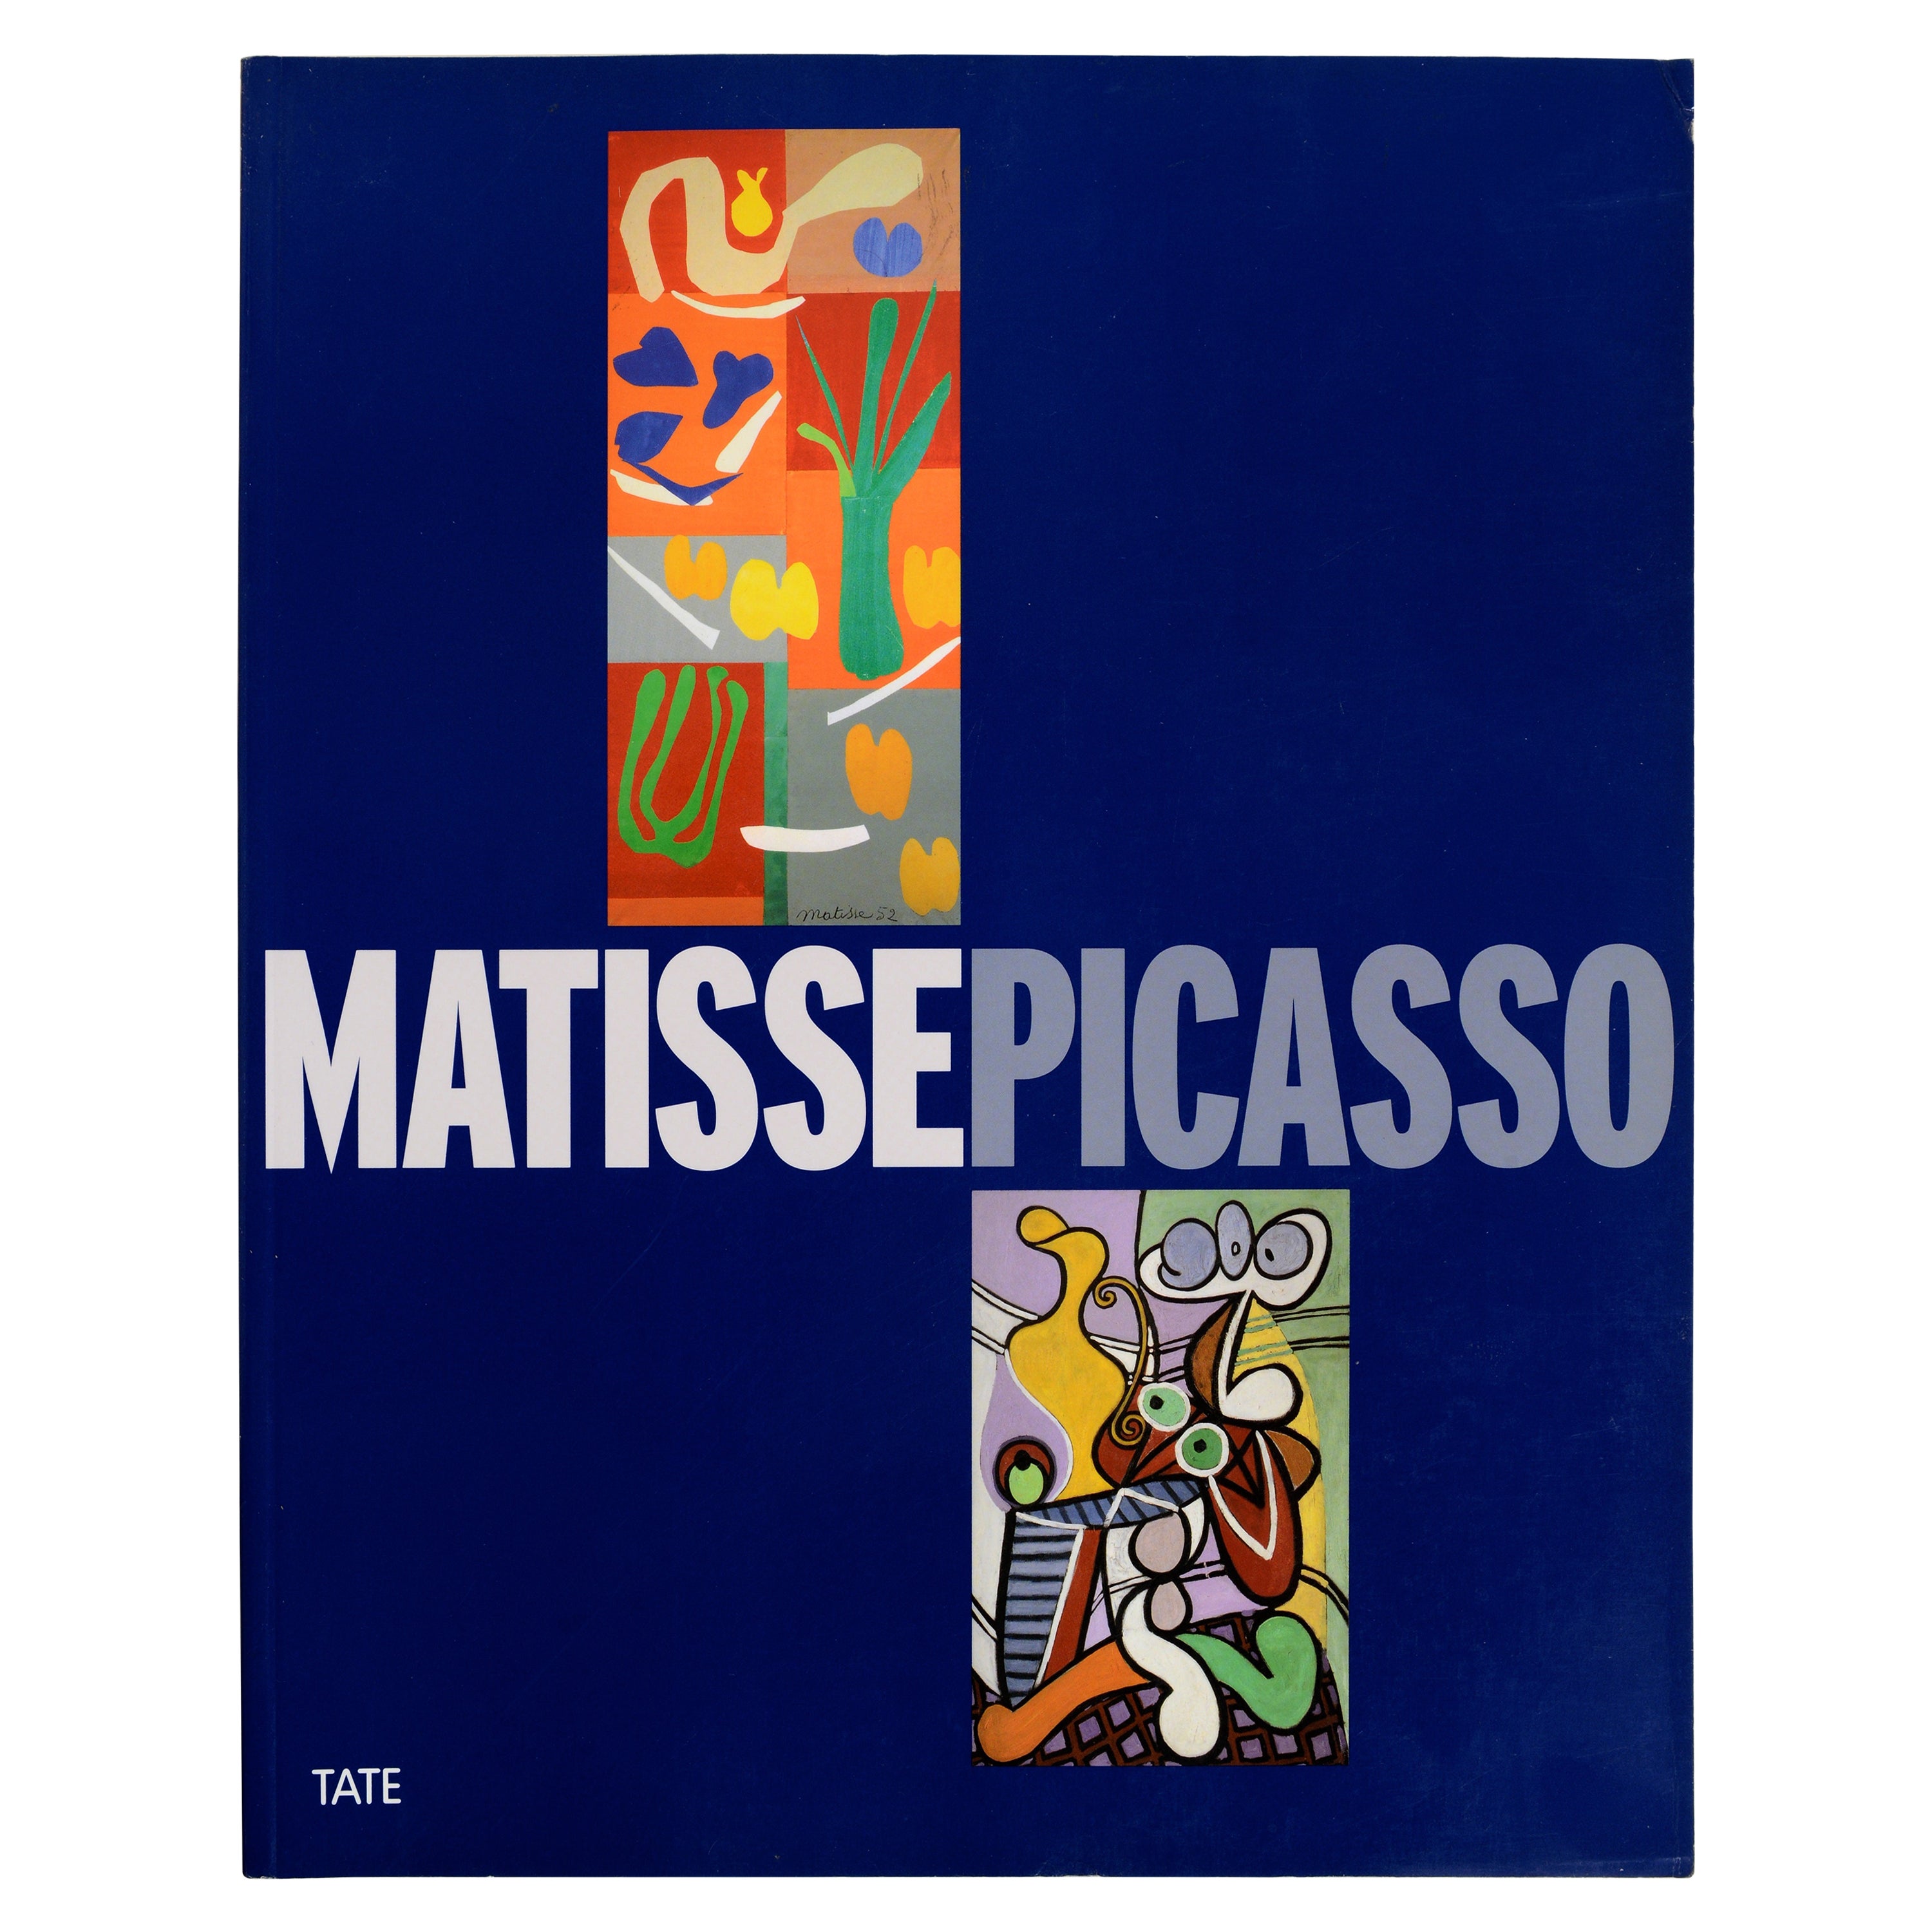 Matisse Picasso, From the Estate of Herbert Kasper, Thank You Letter From MOMA For Sale